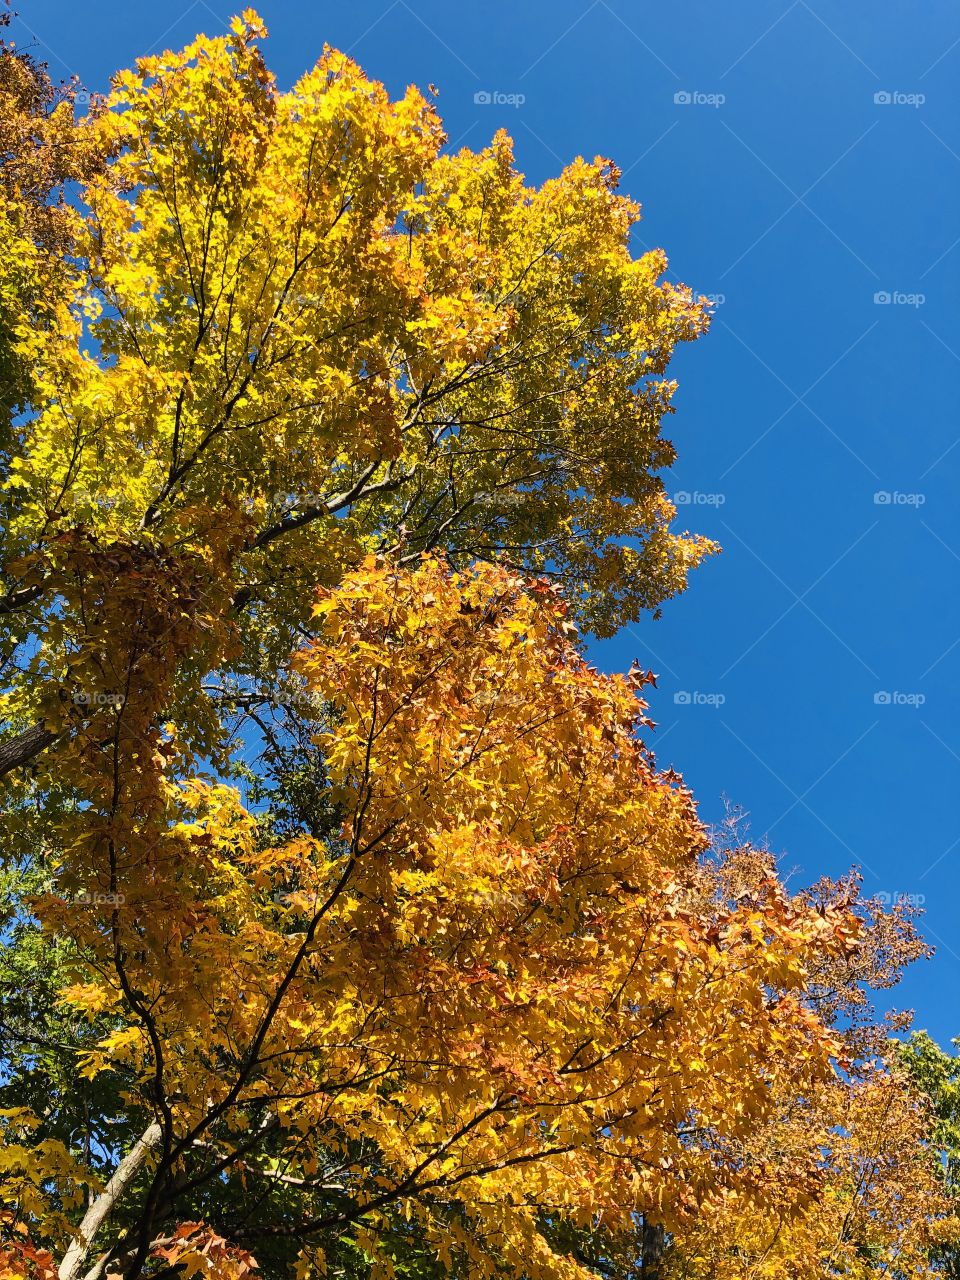 Royal blue sky and peak fall leaf color in Door County, Wisconsin.